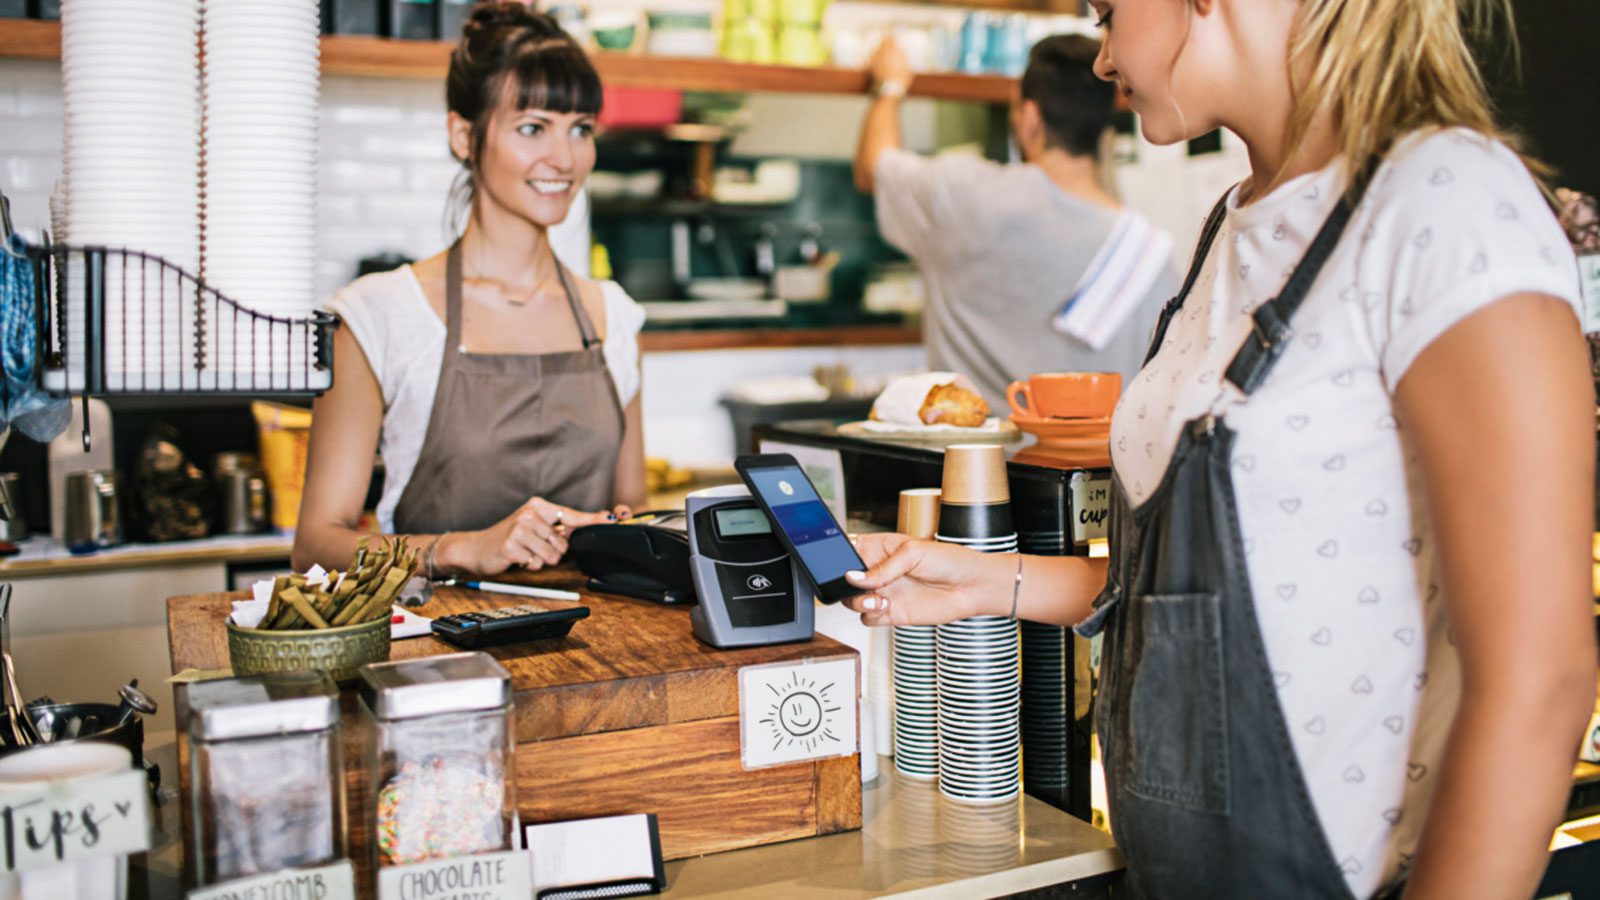 Consumers prefer contactless payment